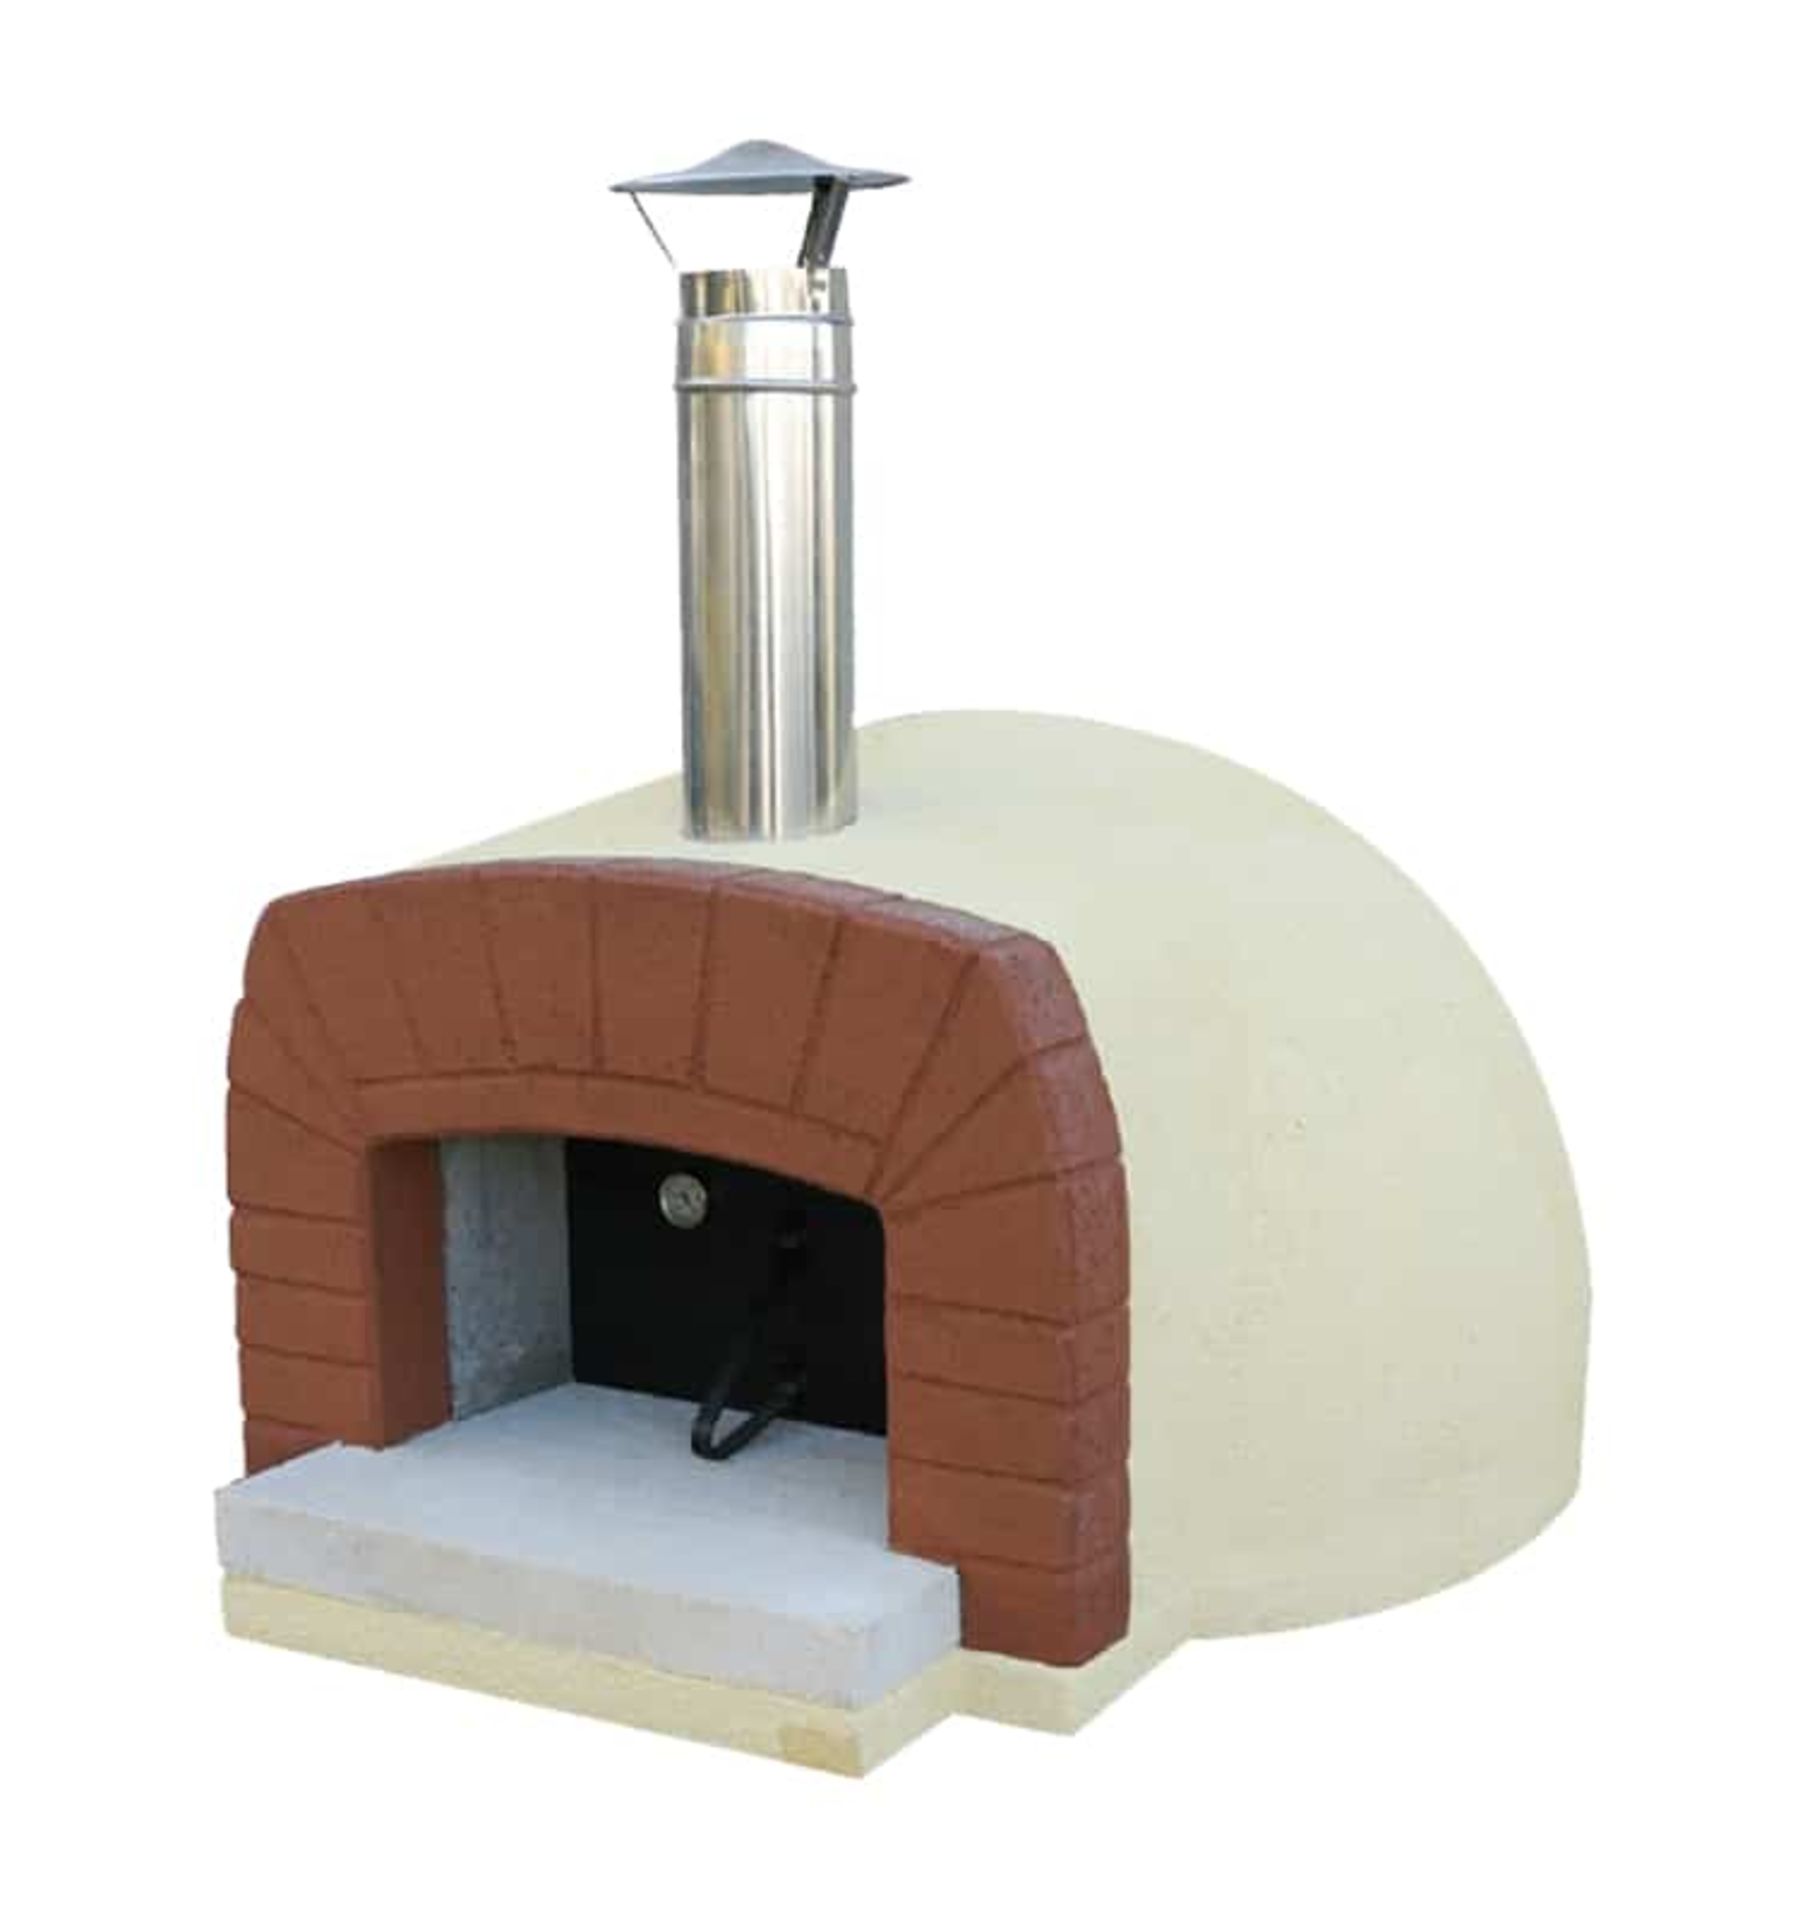 Etna Wood Burning Oven, Weight 770 kg, Oven dimensions L 120, P 138, H 75/120cm (with flue), Cooking